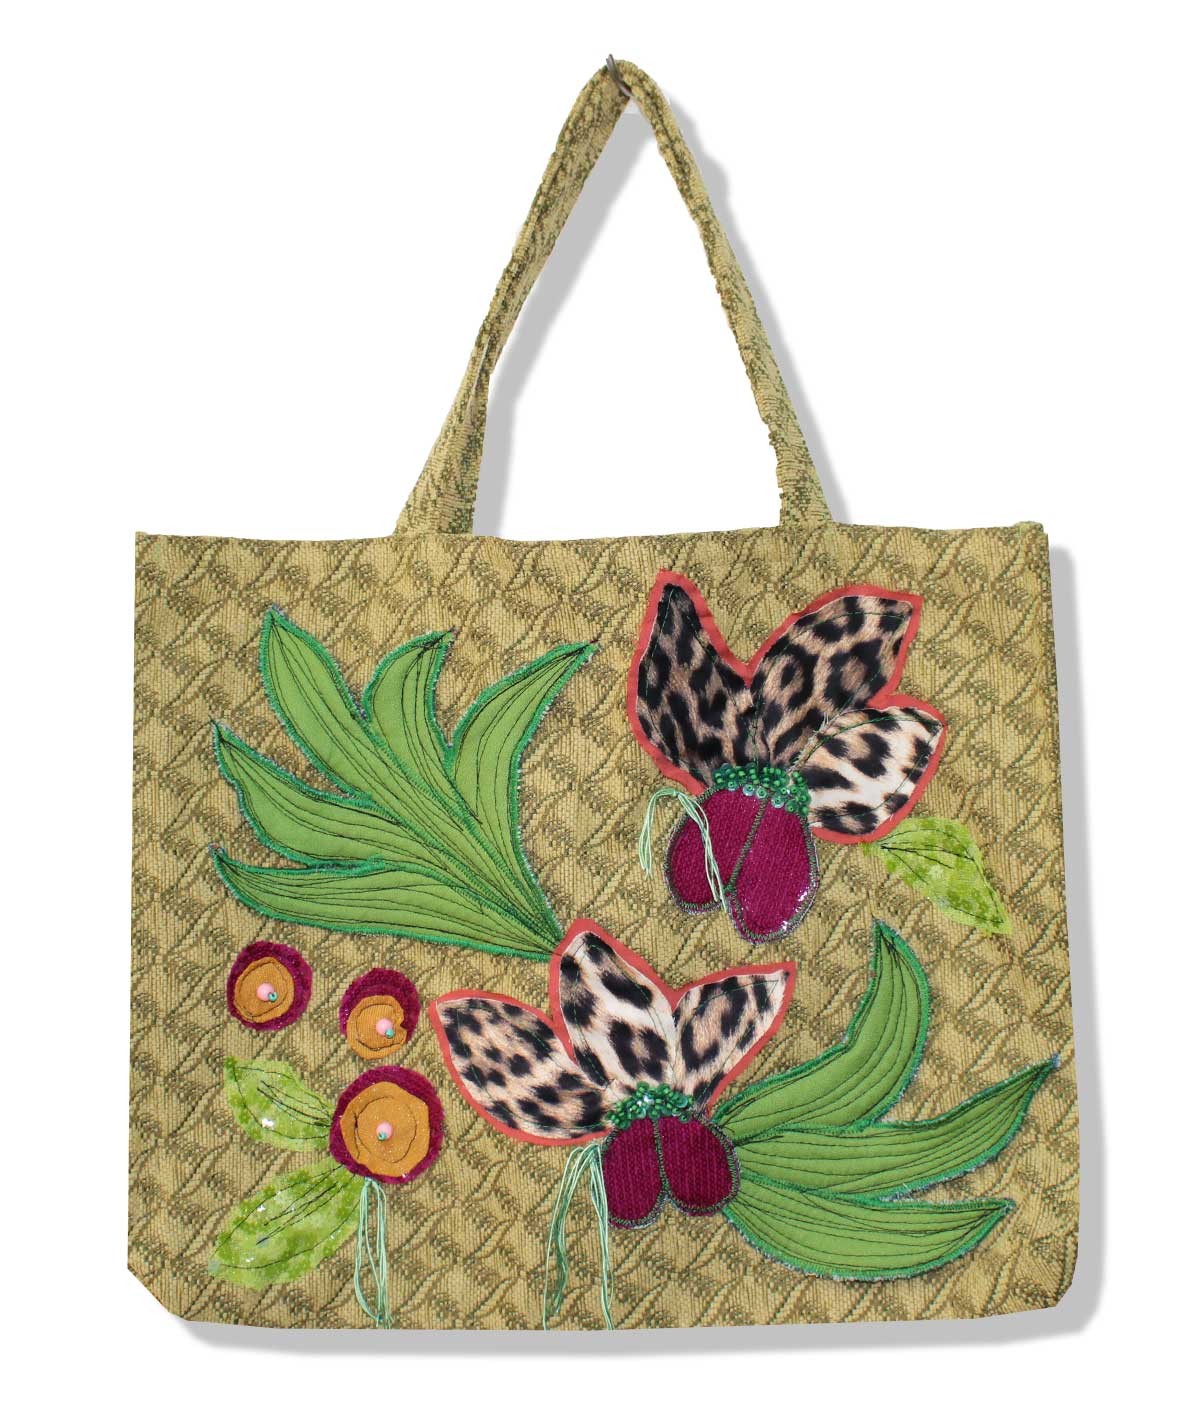 Fabric tote bag with flowers